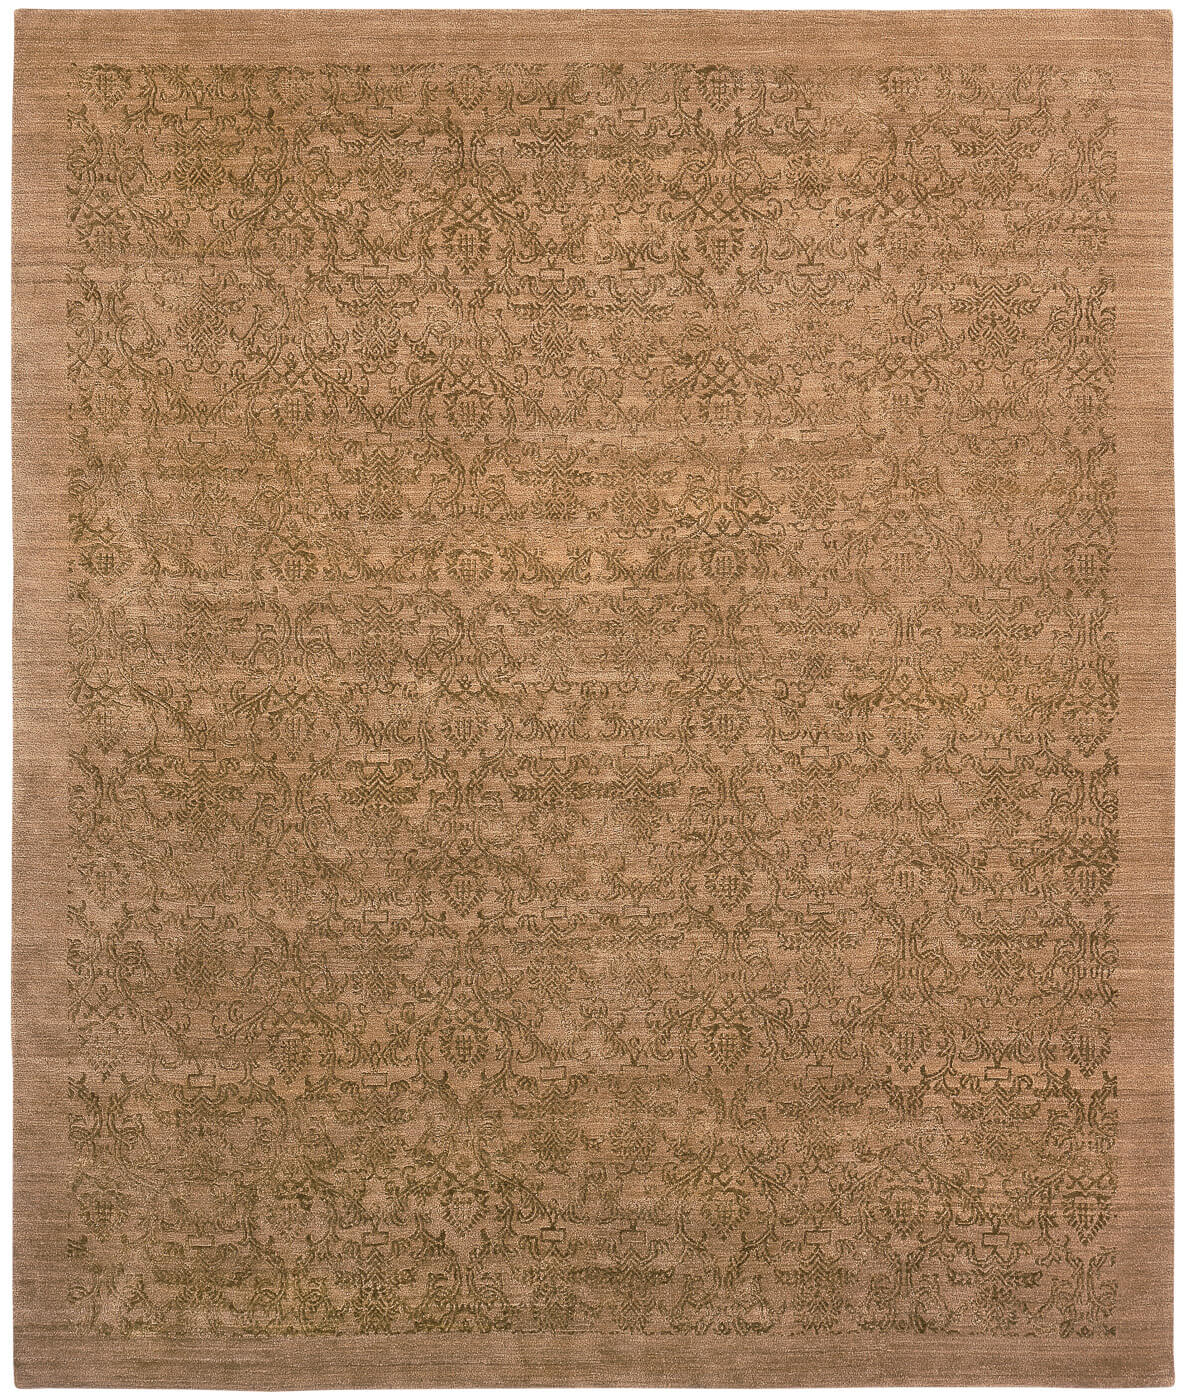 Hand-Woven Roma Beige Rug